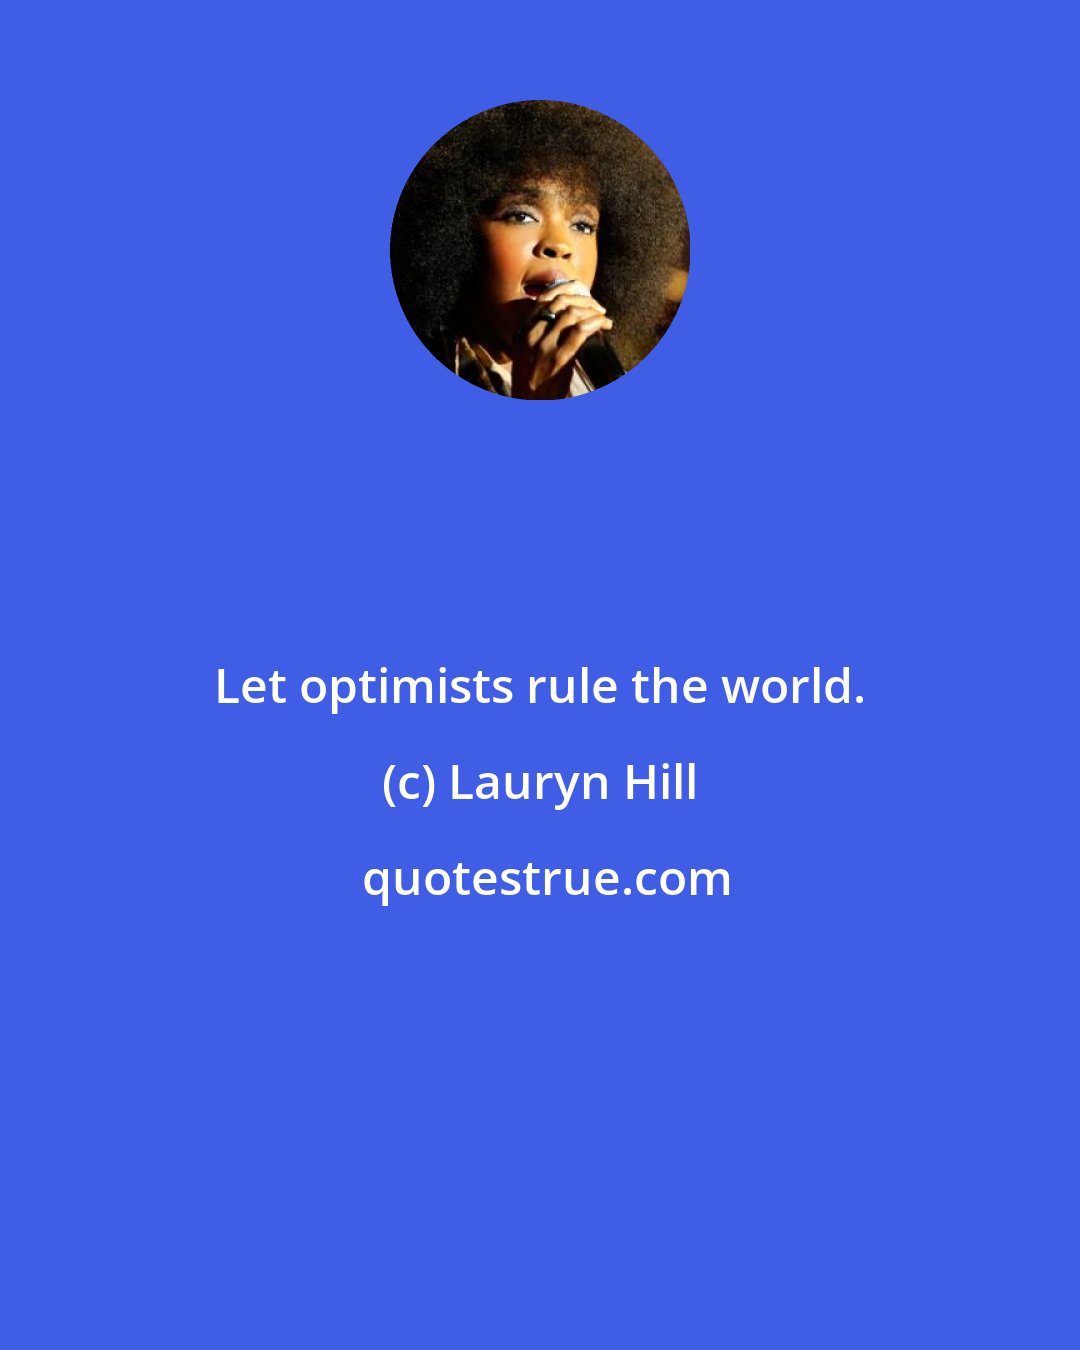 Lauryn Hill: Let optimists rule the world.